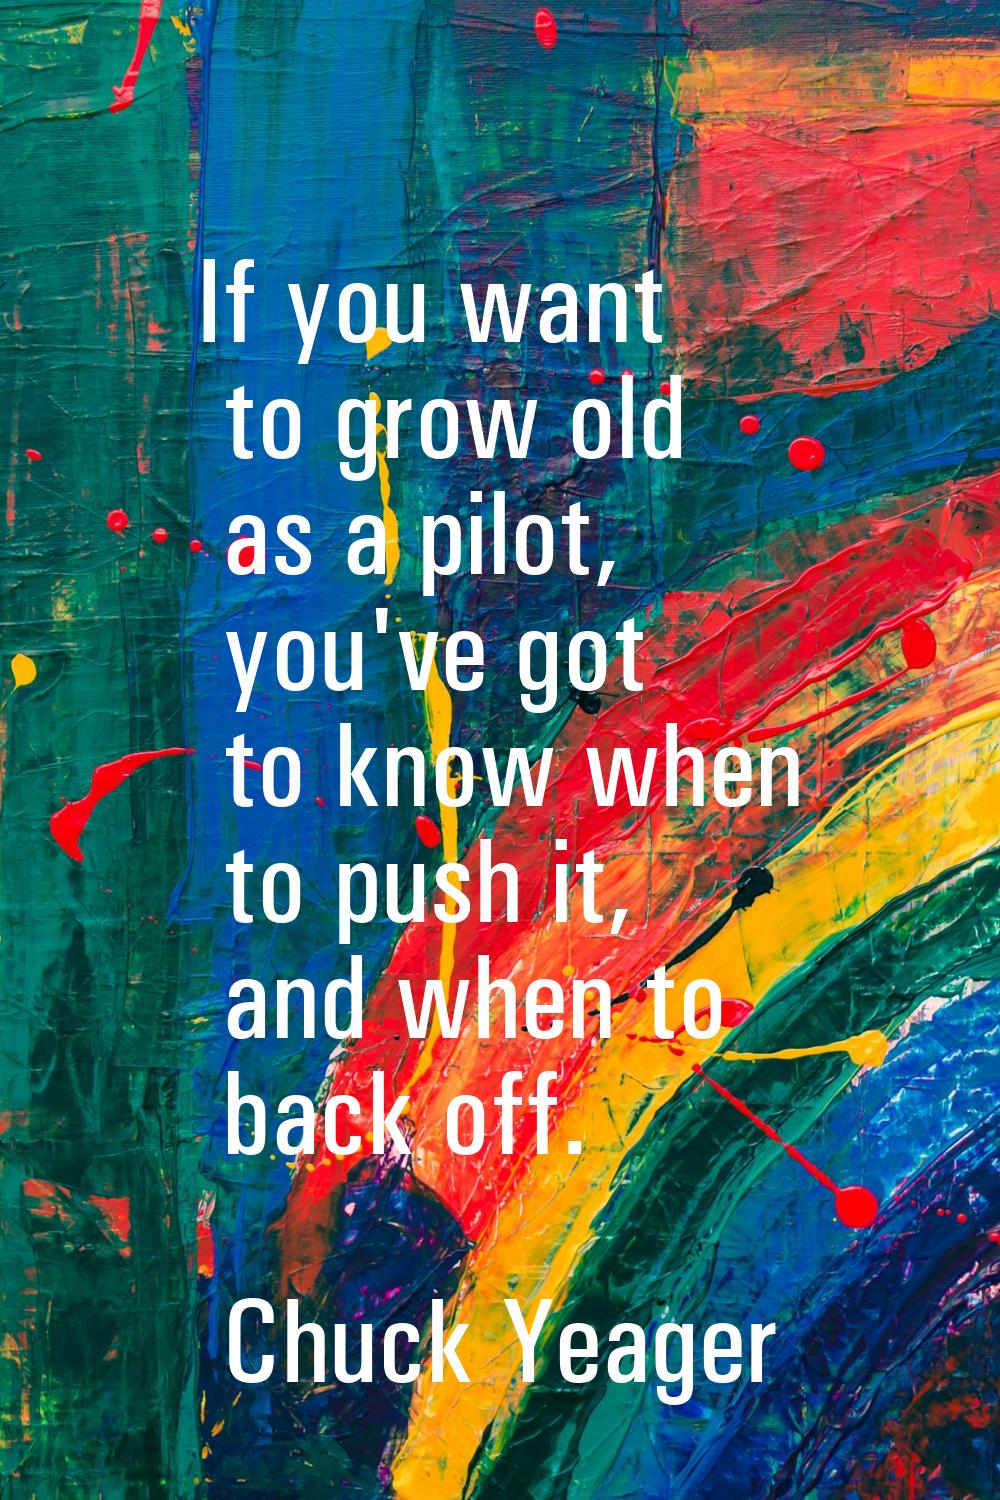 If you want to grow old as a pilot, you've got to know when to push it, and when to back off.